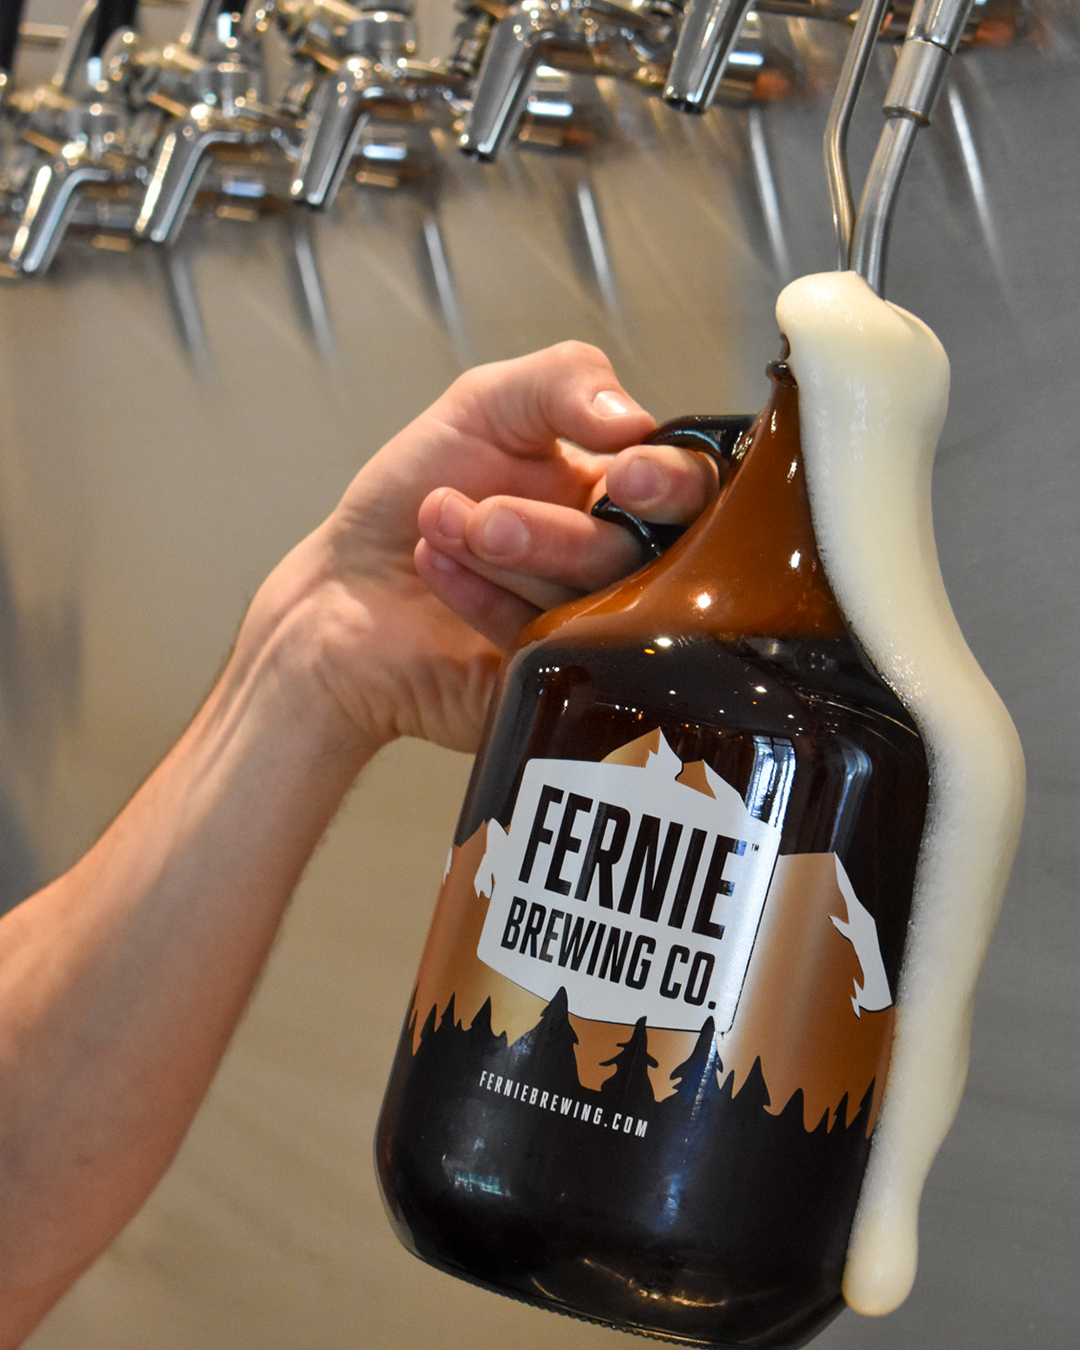 Fernie Brewing Co. Growler being filled.